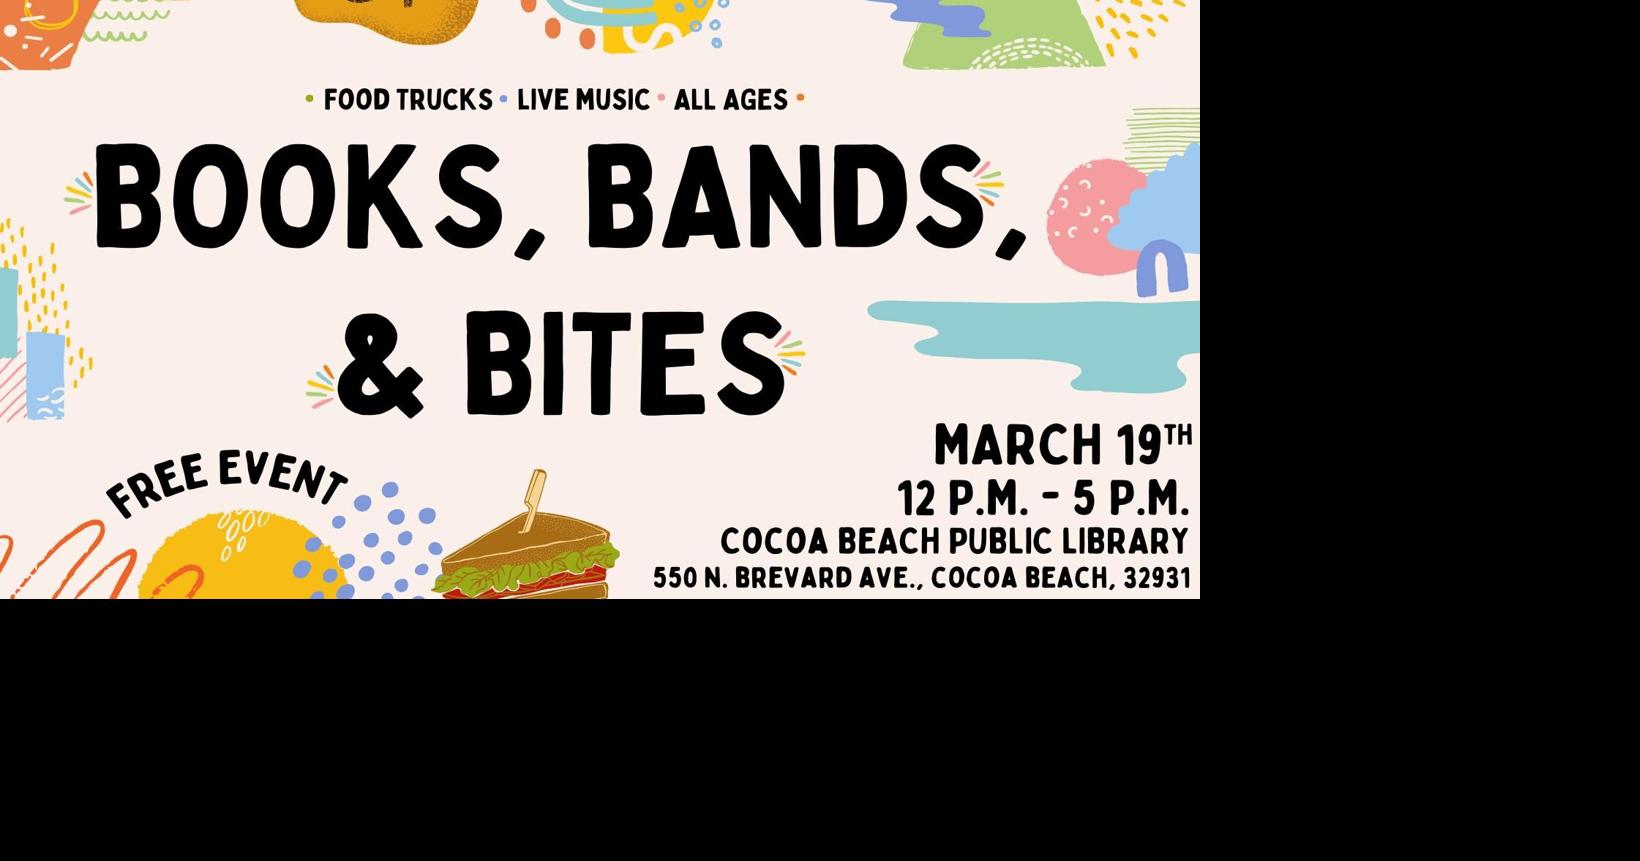 Books, Bands, and Bites Cocoa Beach Library Calendar